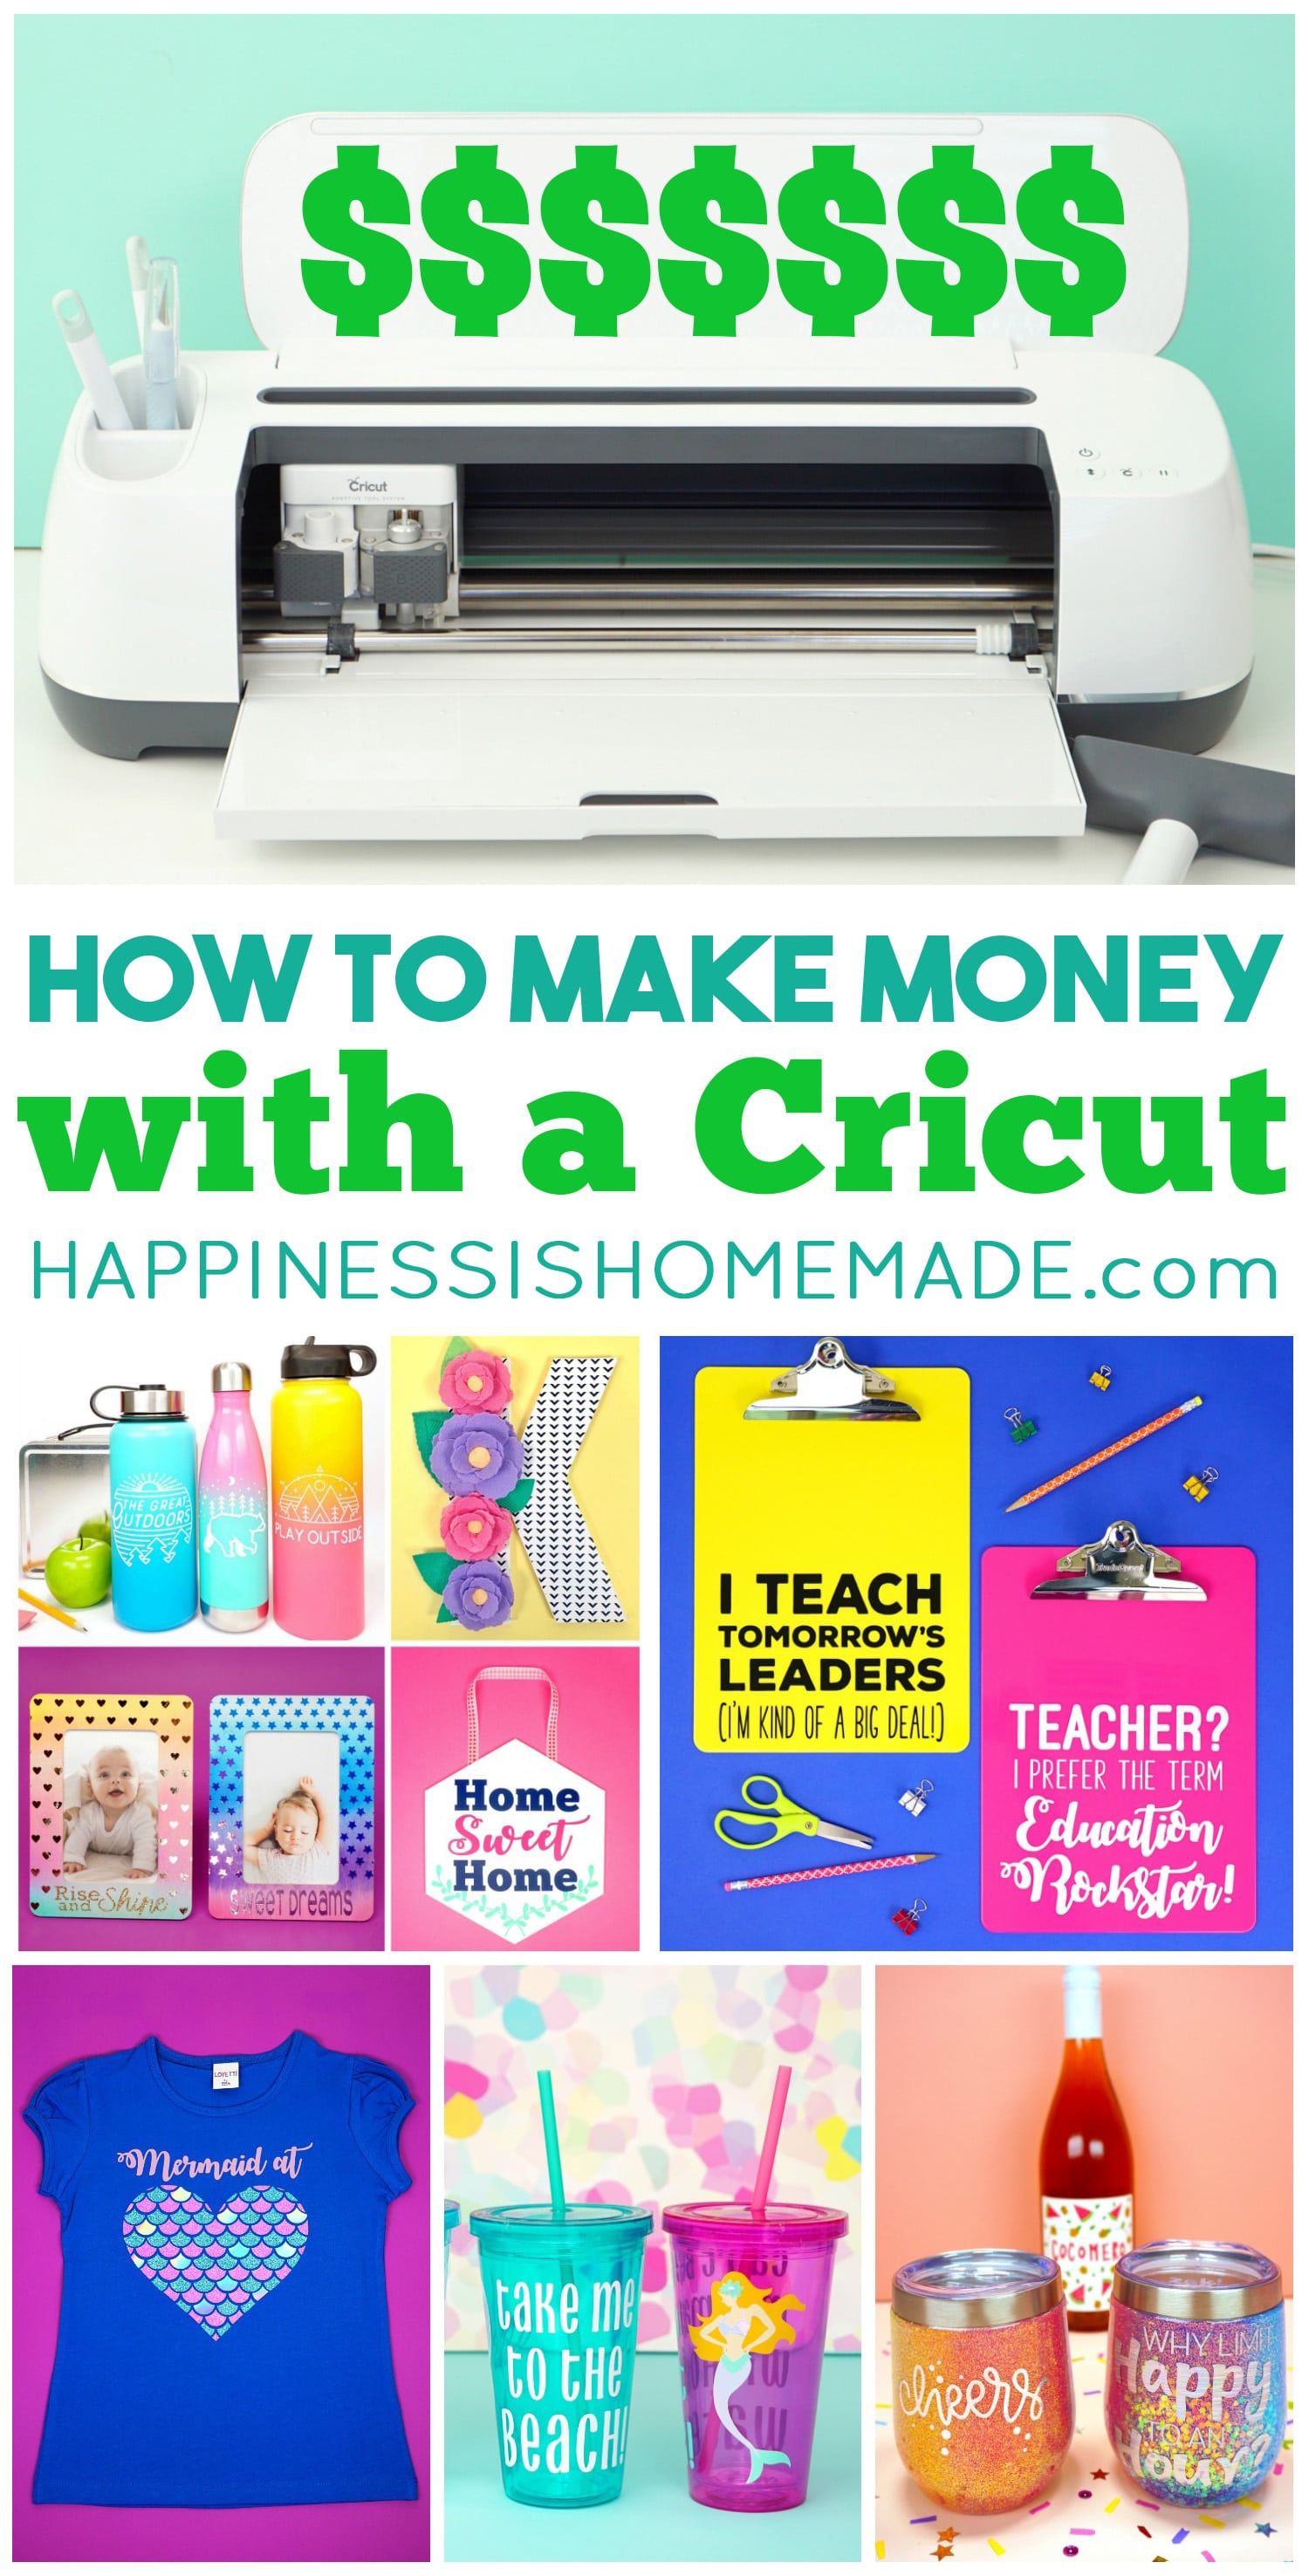 https://www.happinessishomemade.net/wp-content/uploads/2020/06/How-to-Make-Money-with-a-Cricut-.jpg